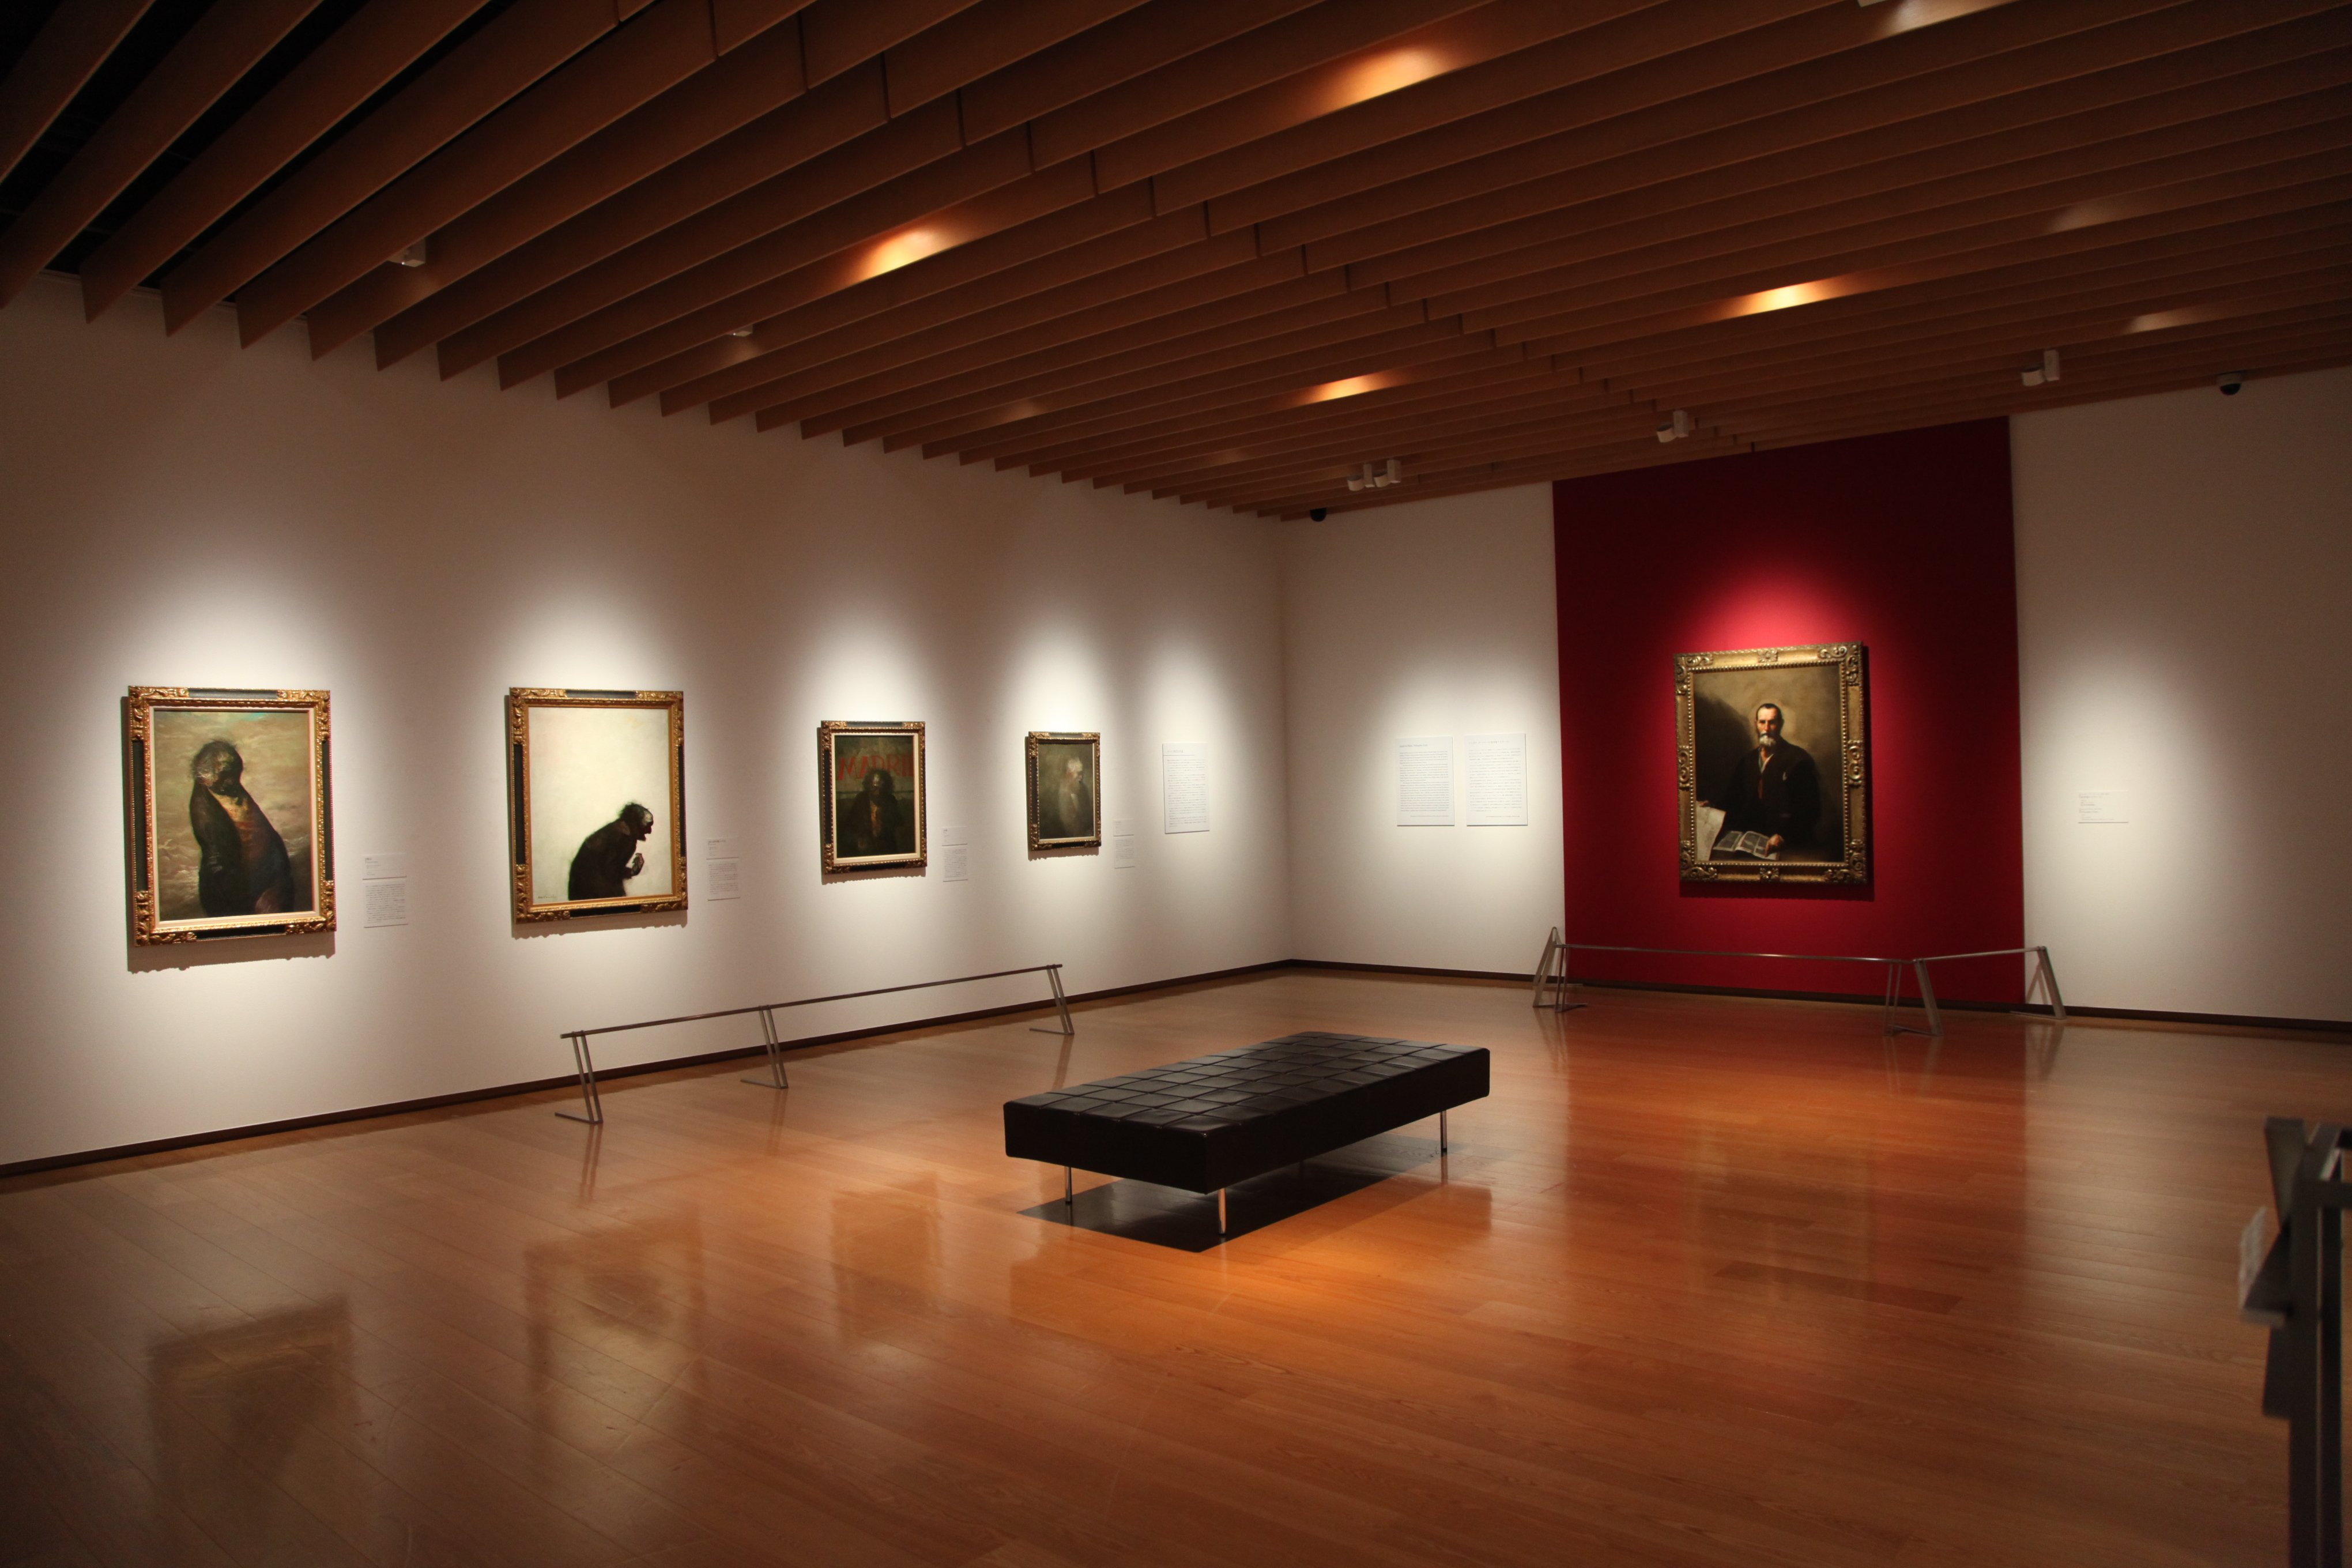 “Collection PLUS” preview program | <i>Rey Camoi’s Spanish Period: With the Work of the Baroque Master Jusepe de Ribera</i><br>Venue: Nagasaki Prefectural Art Museum


